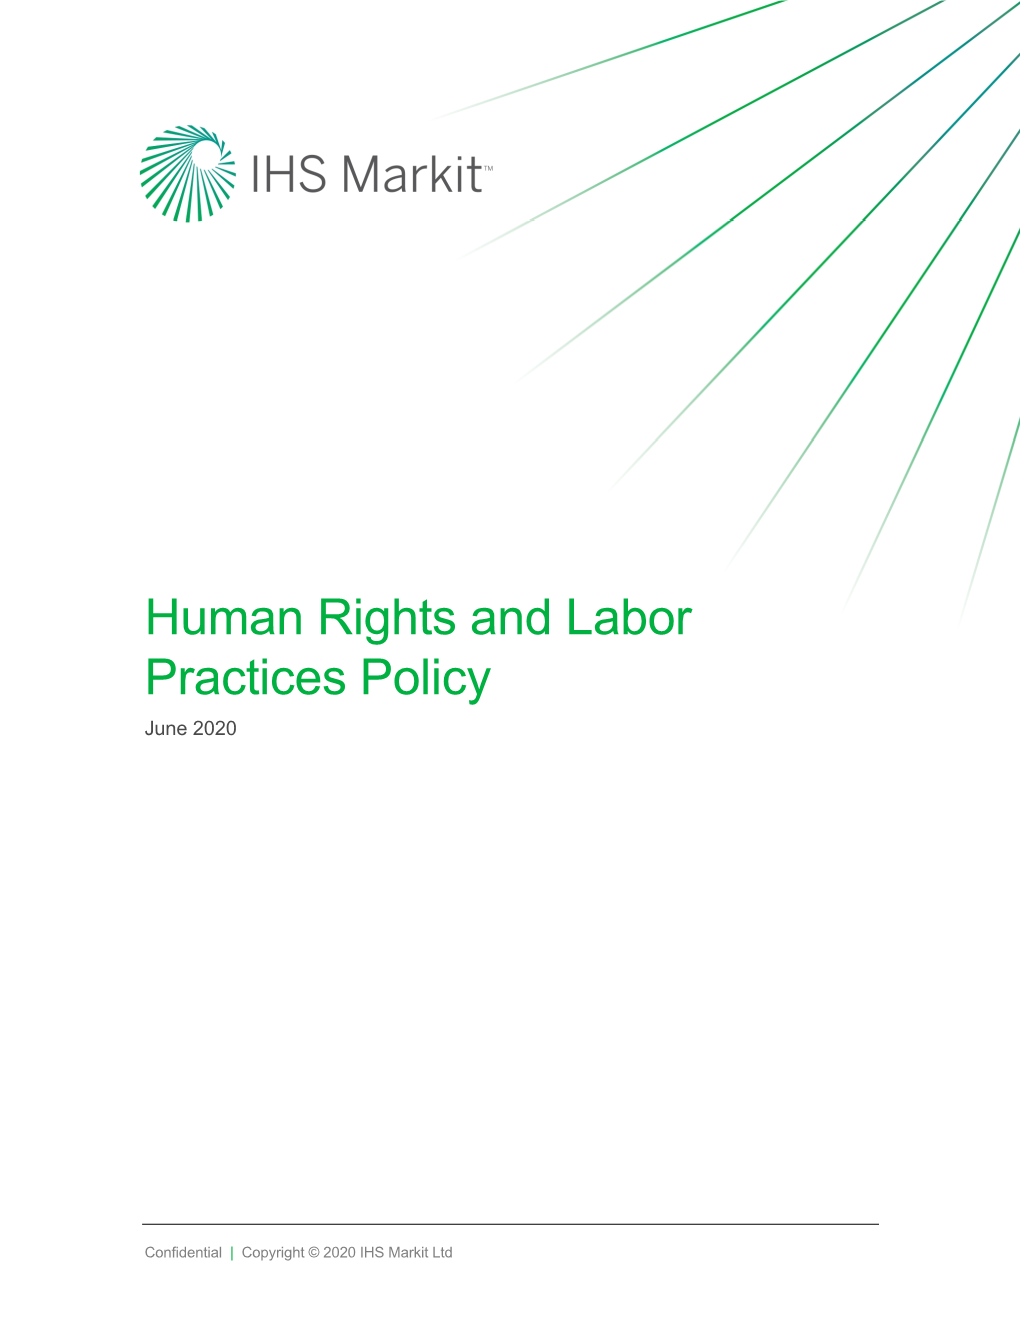 Human Rights and Labor Practices Policy June 2020